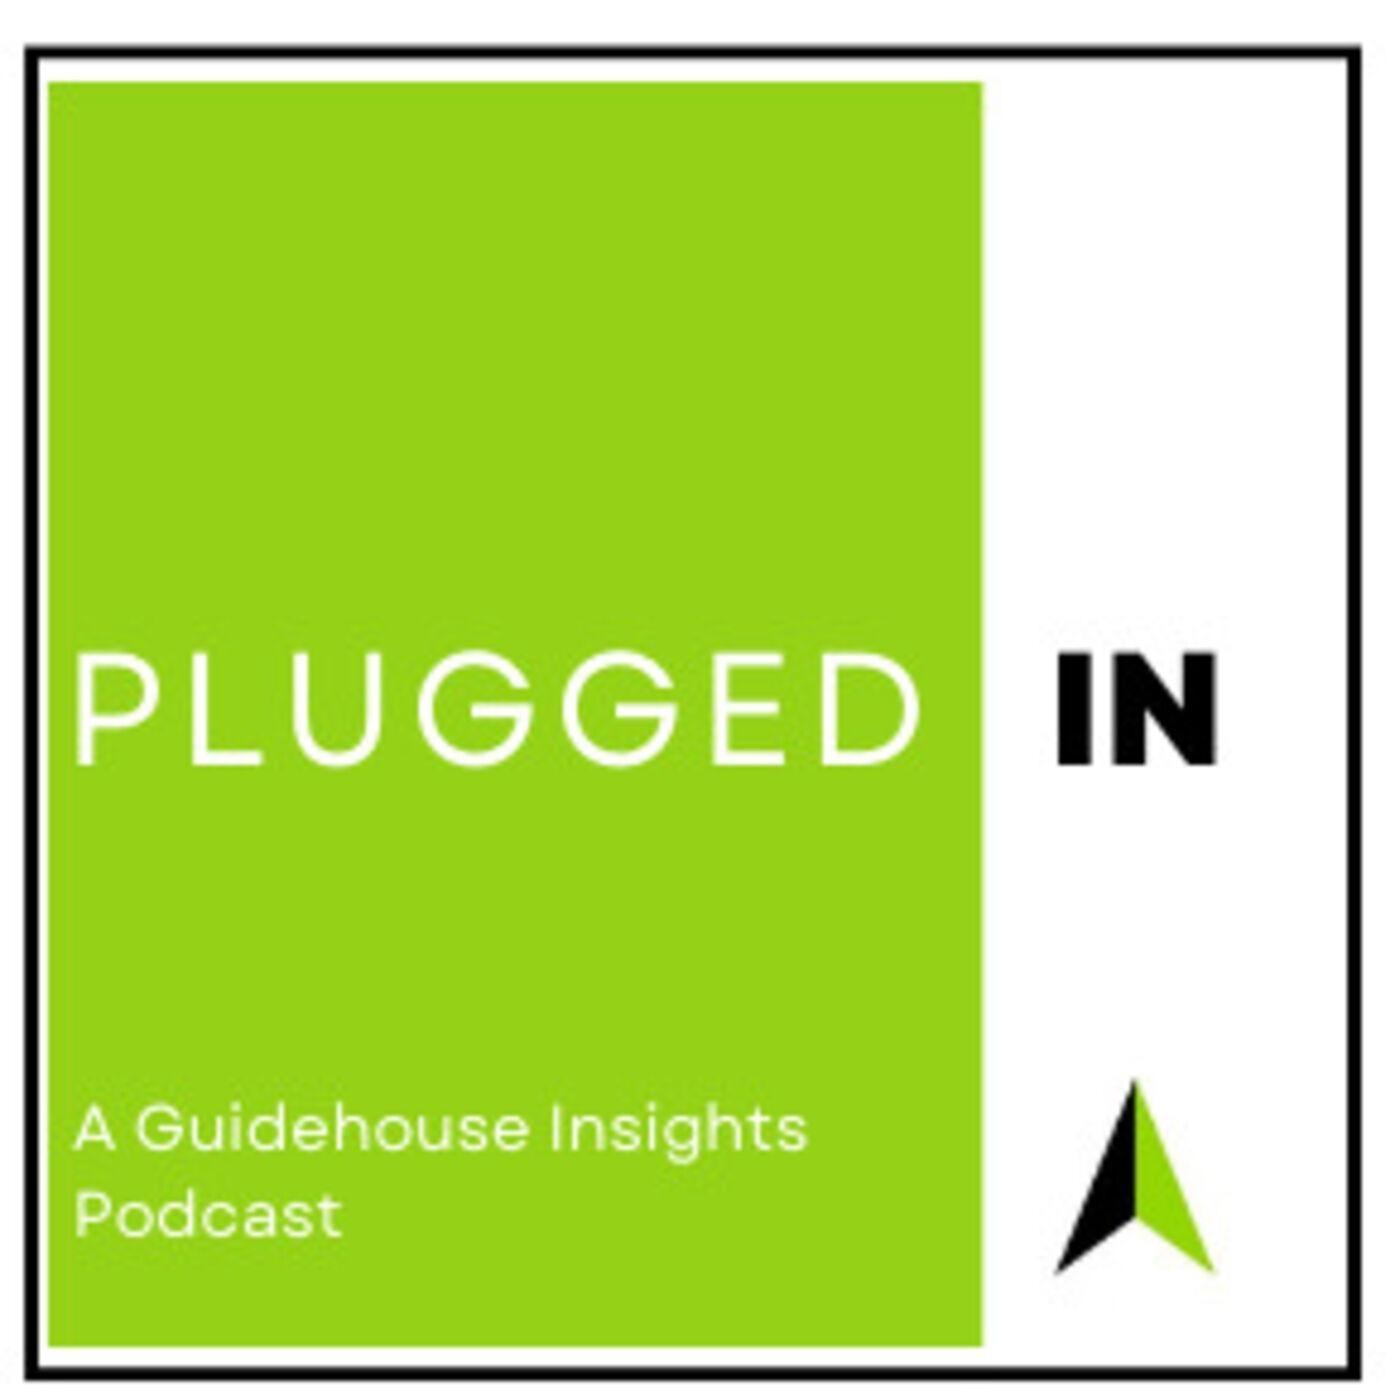 Plugged In: A Guidehouse Insights Podcast